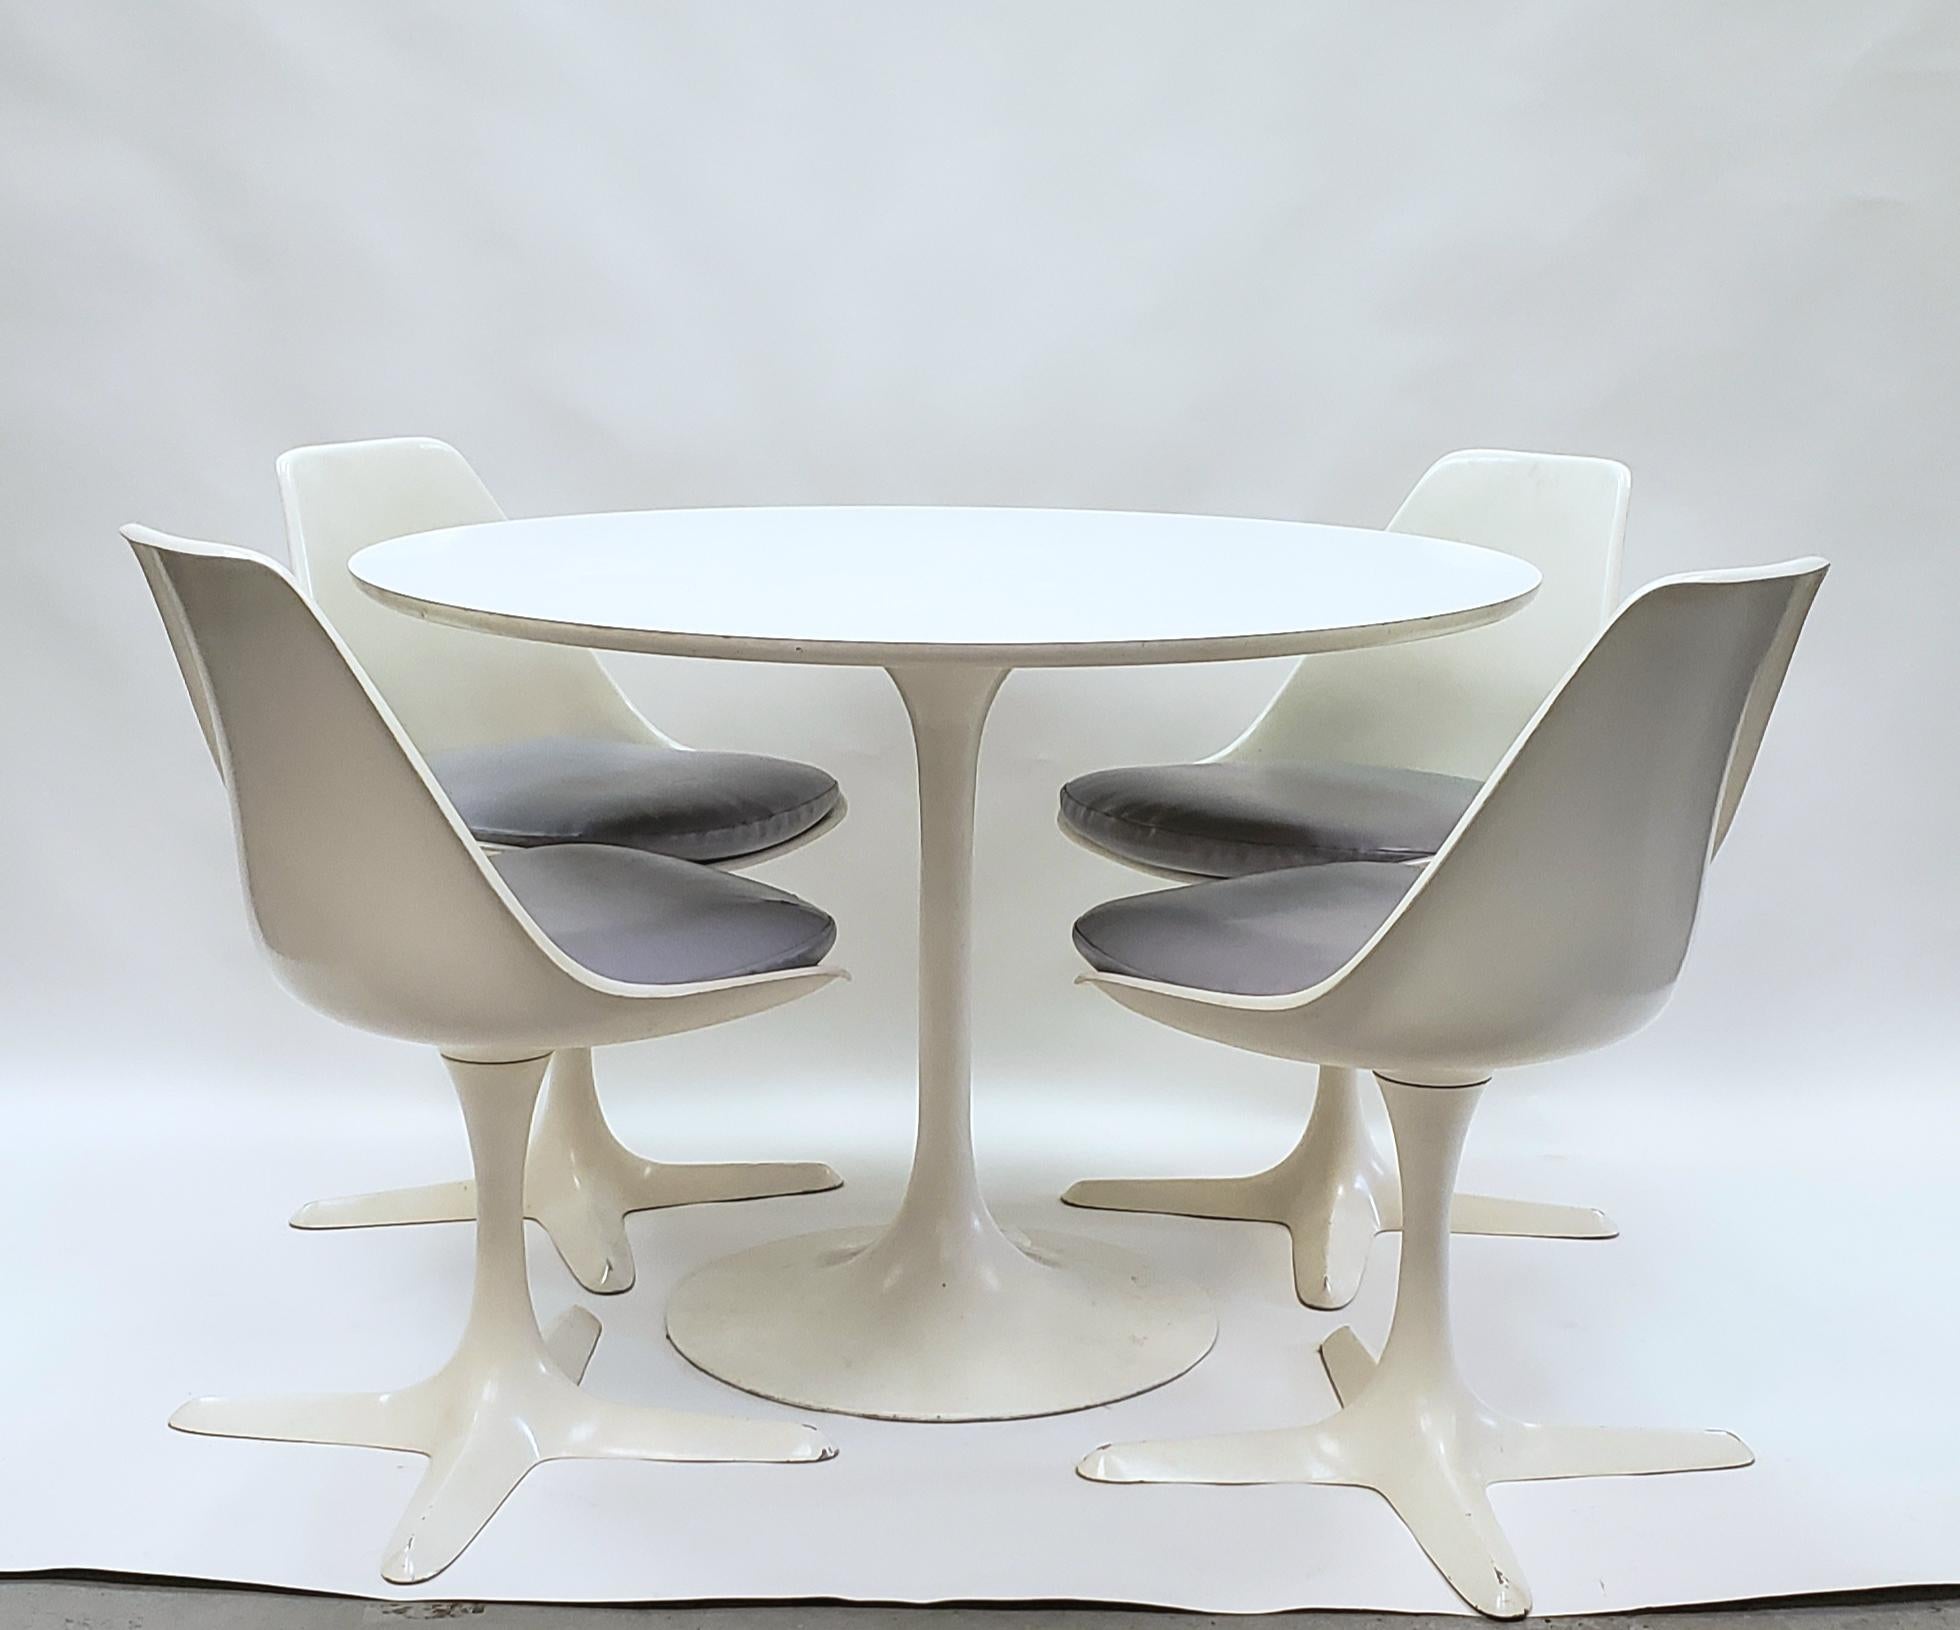 20th Century Mid-Century Modern Tulip Table and Chairs by Burke